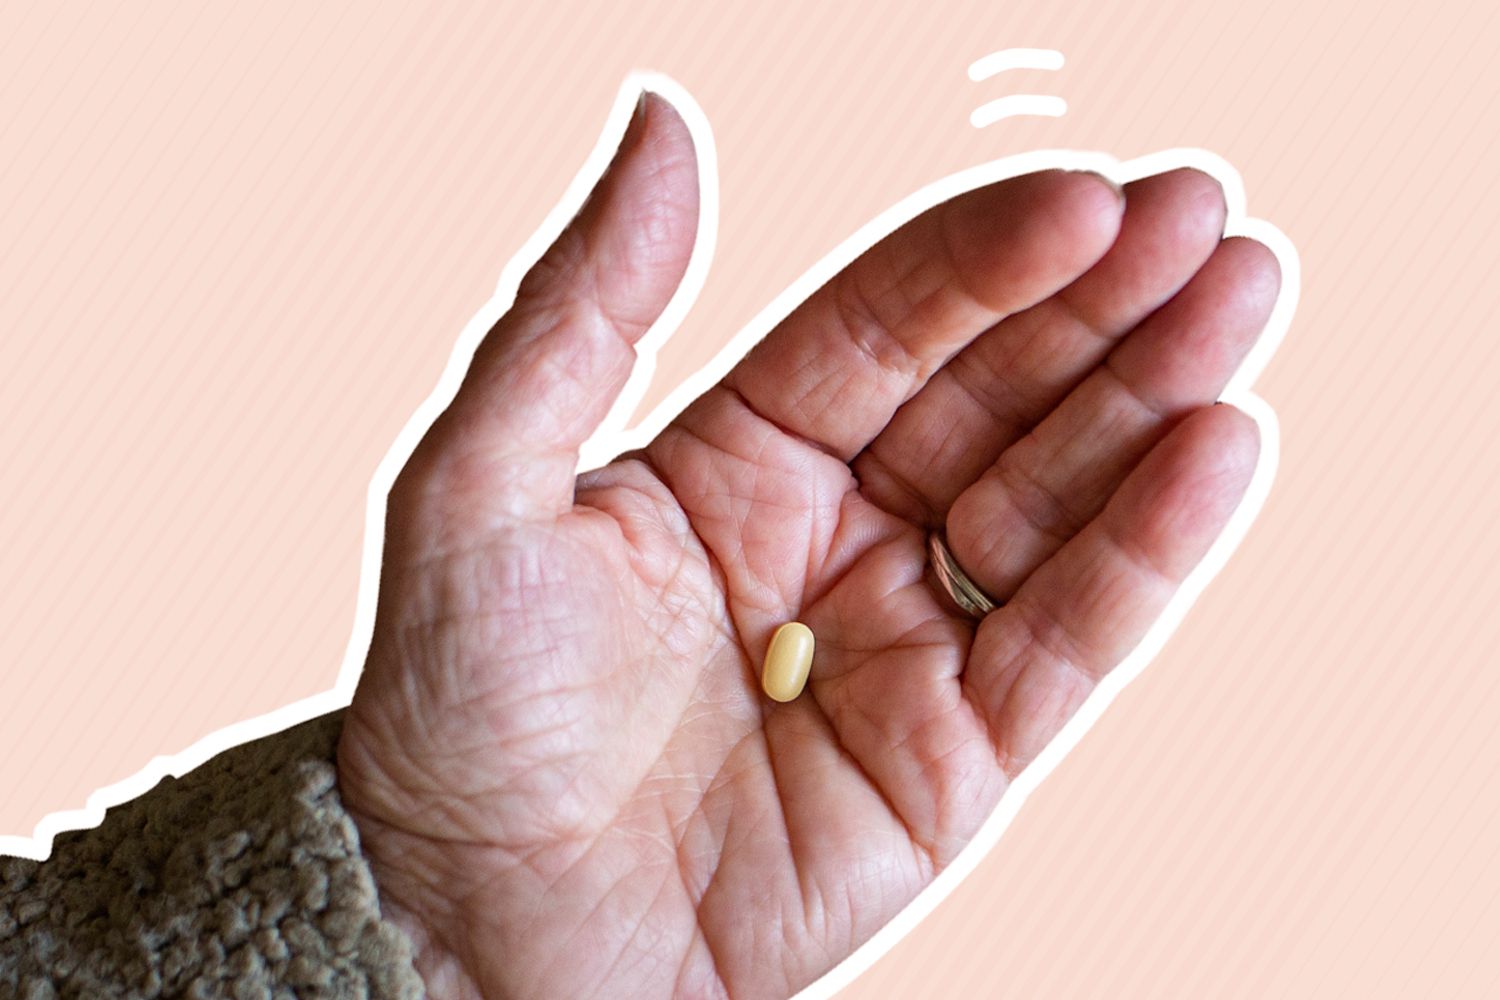 A hand holding a multivitamin for women over 50 on an orange background